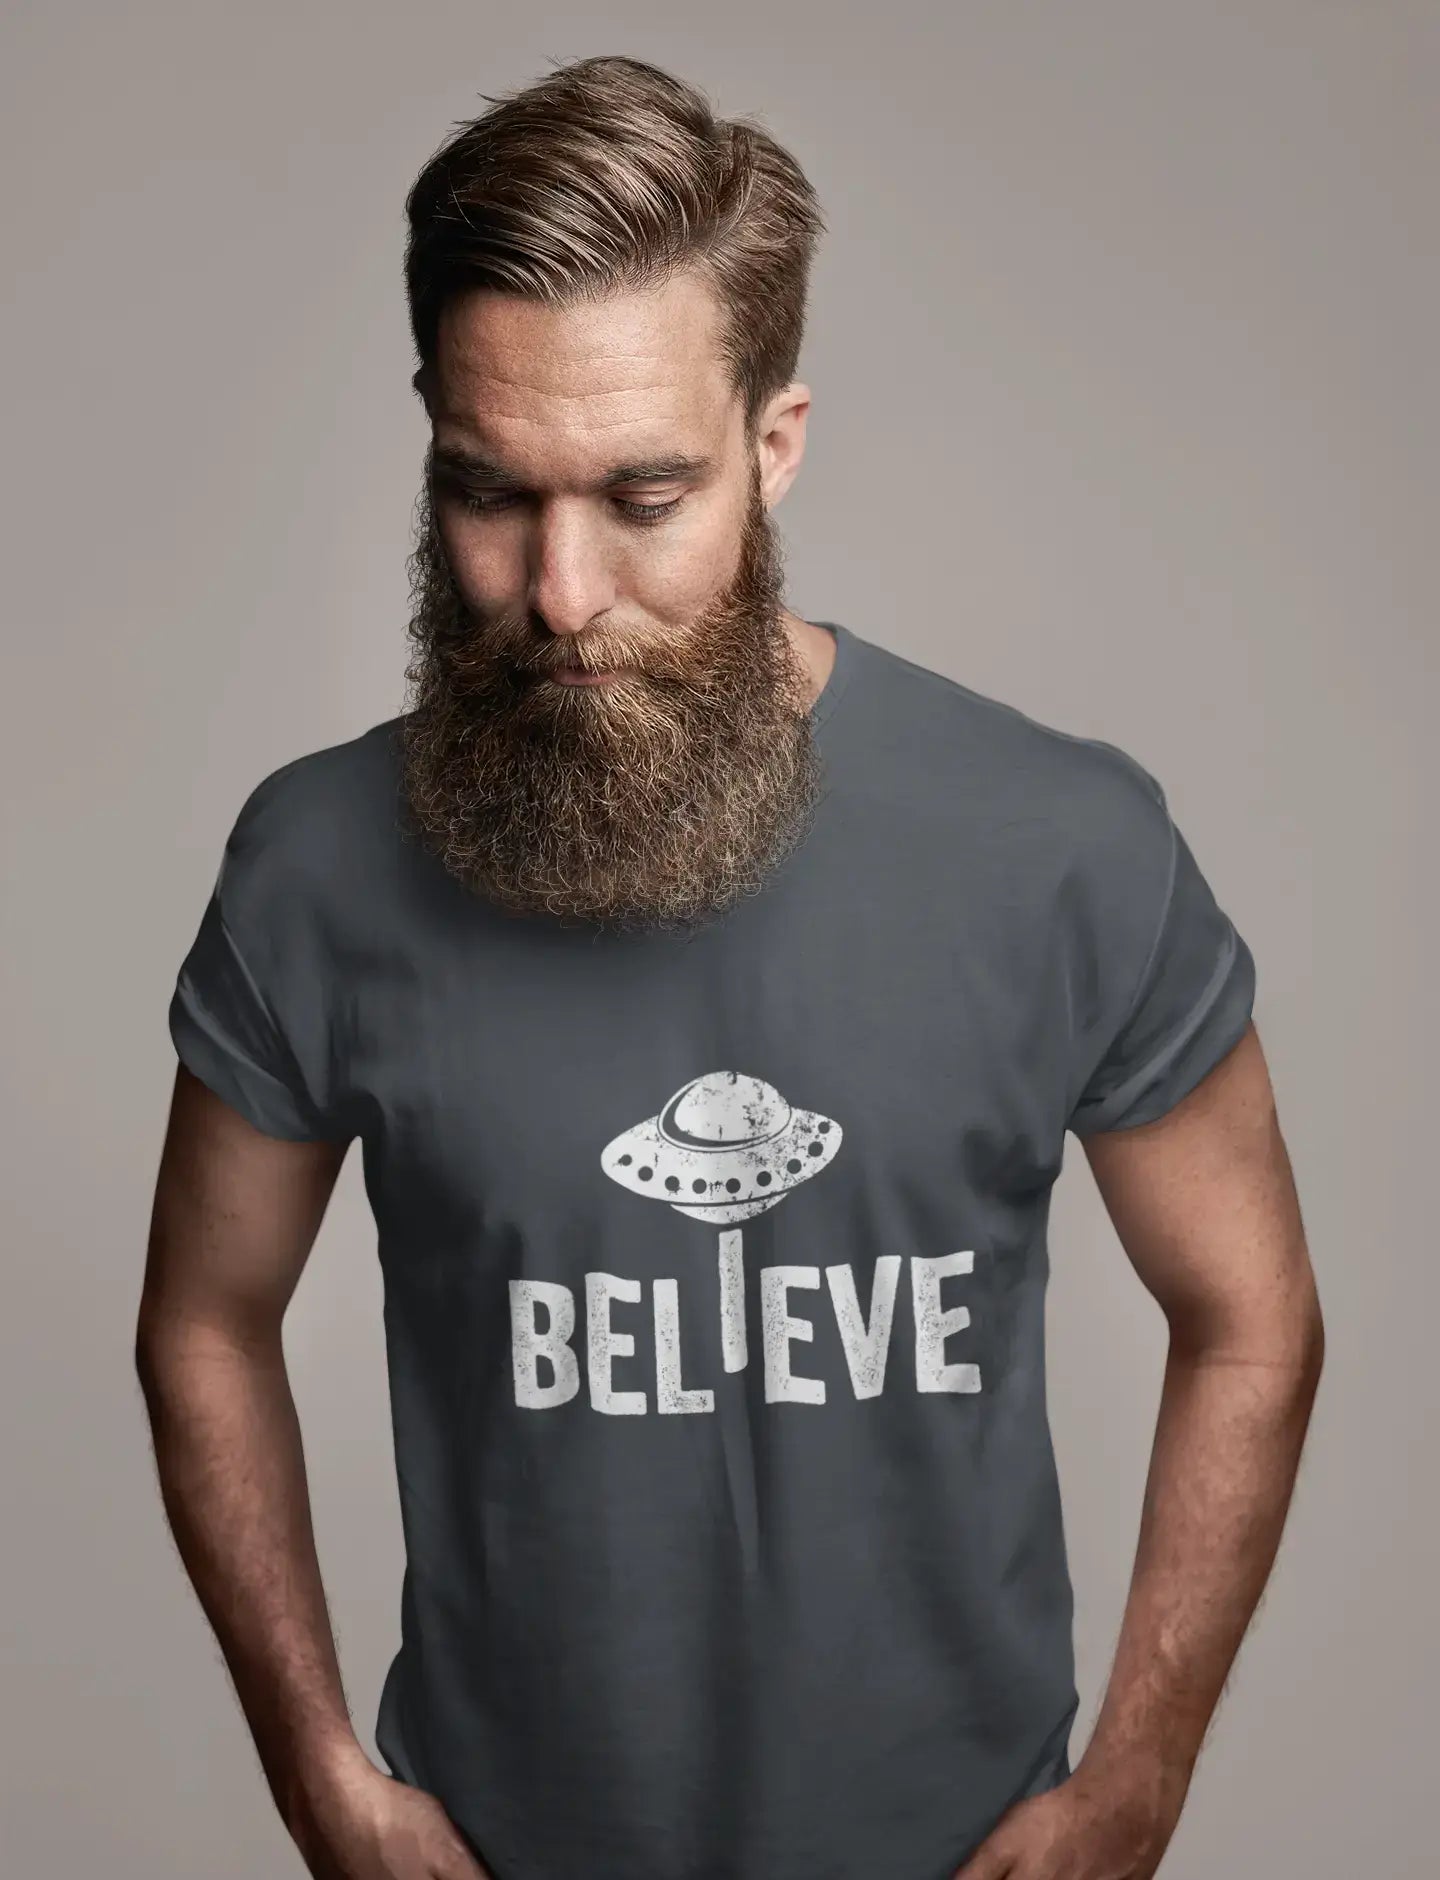 ULTRABASIC - Graphic Men's Believe UFO Alien T-Shirt Funny Casual Letter Print Tee Mouse Grey